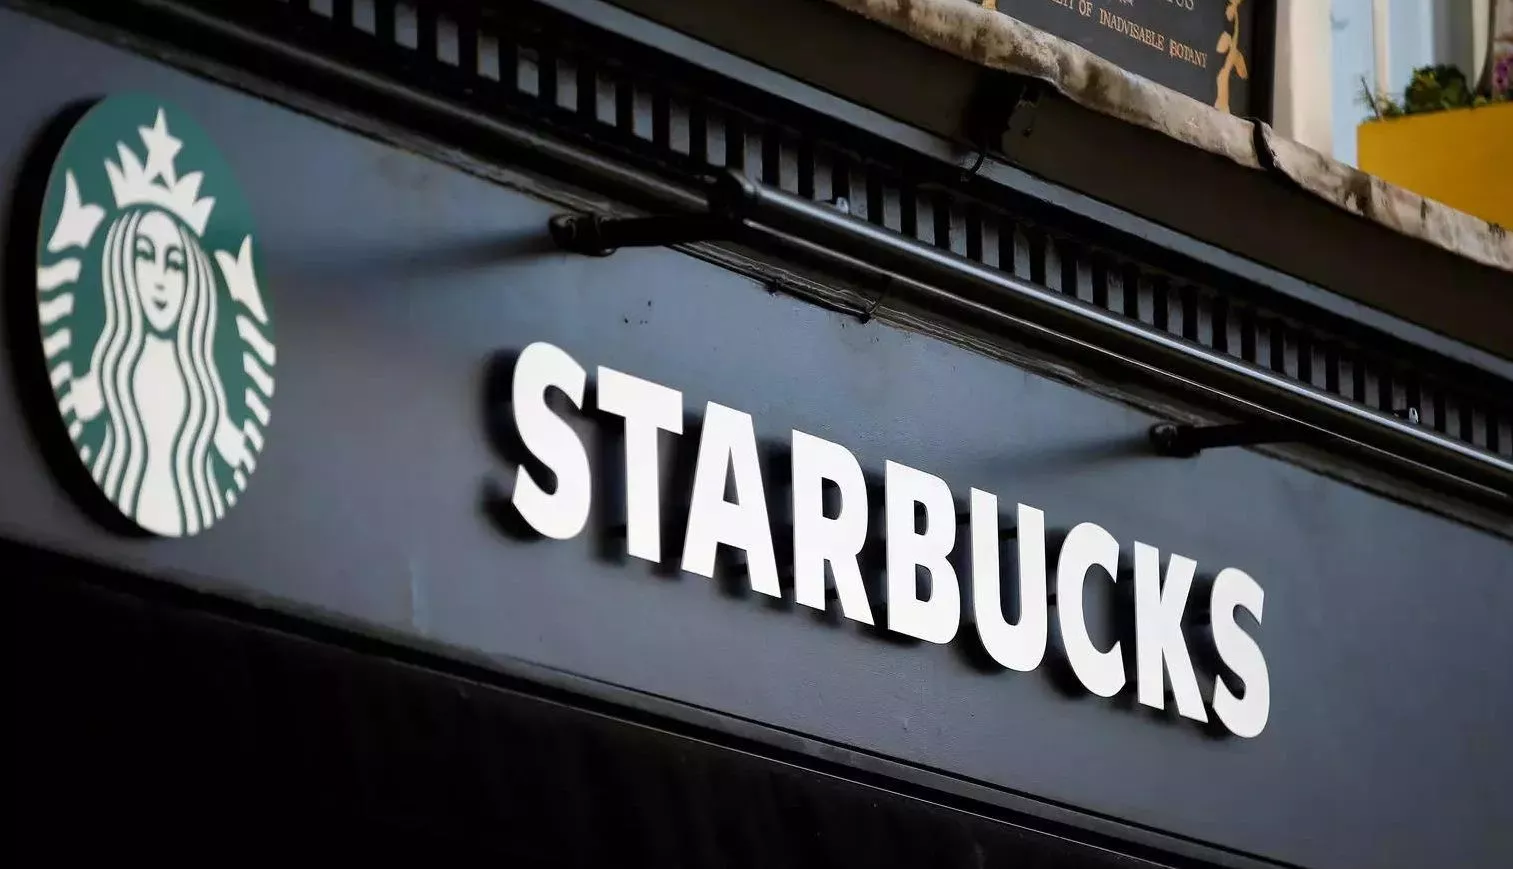 Starbucks Sees Impressive 15% Membership Growth in US to Rewards System